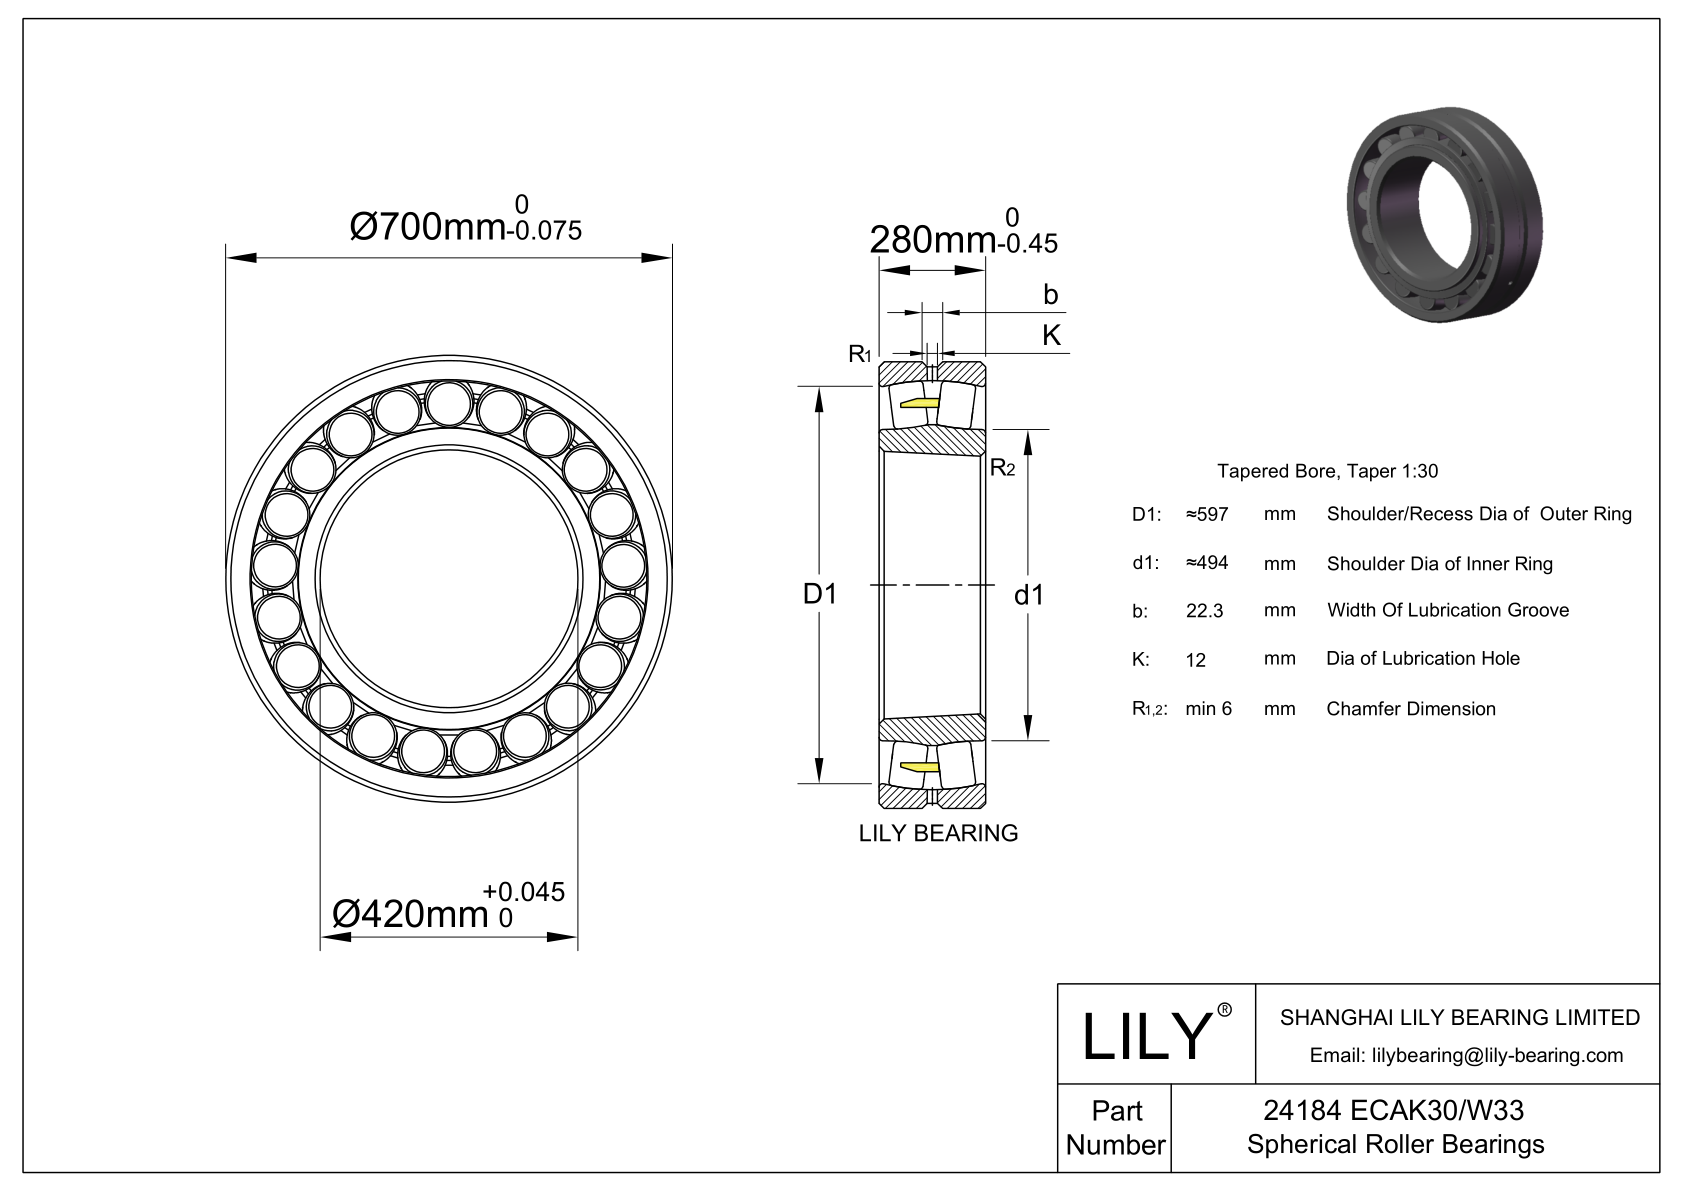 24184 ECAK30/W33 Double Row Spherical Roller Bearing cad drawing